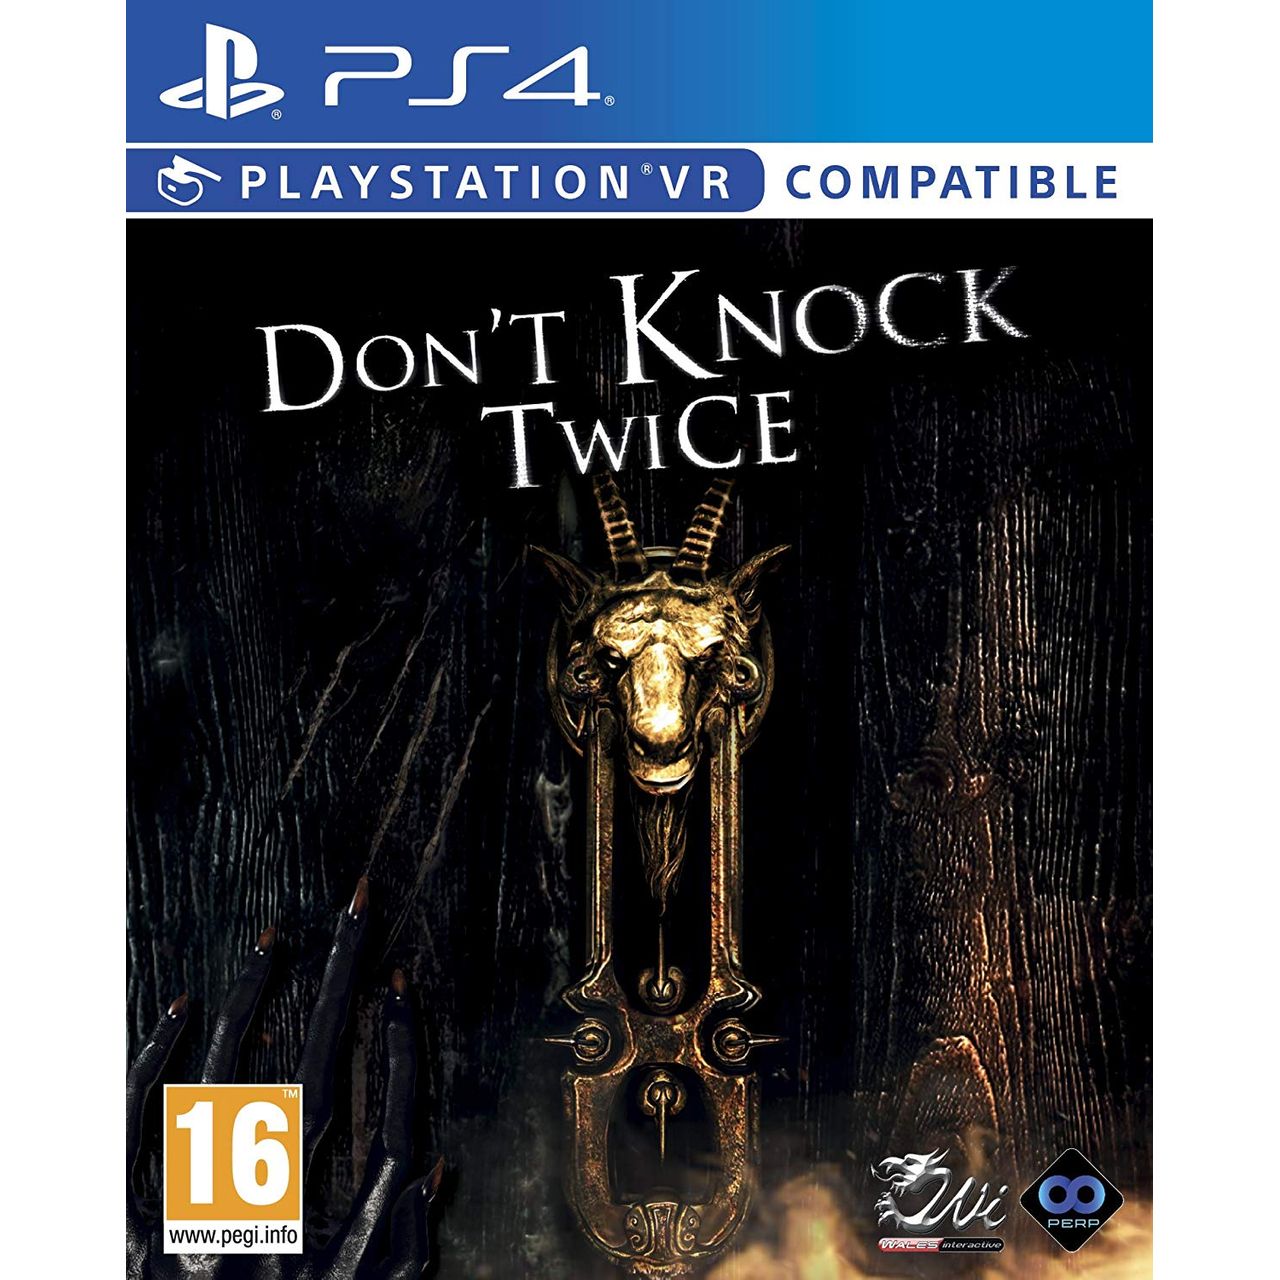 Don't Knock Twice for PlayStation 4 Review